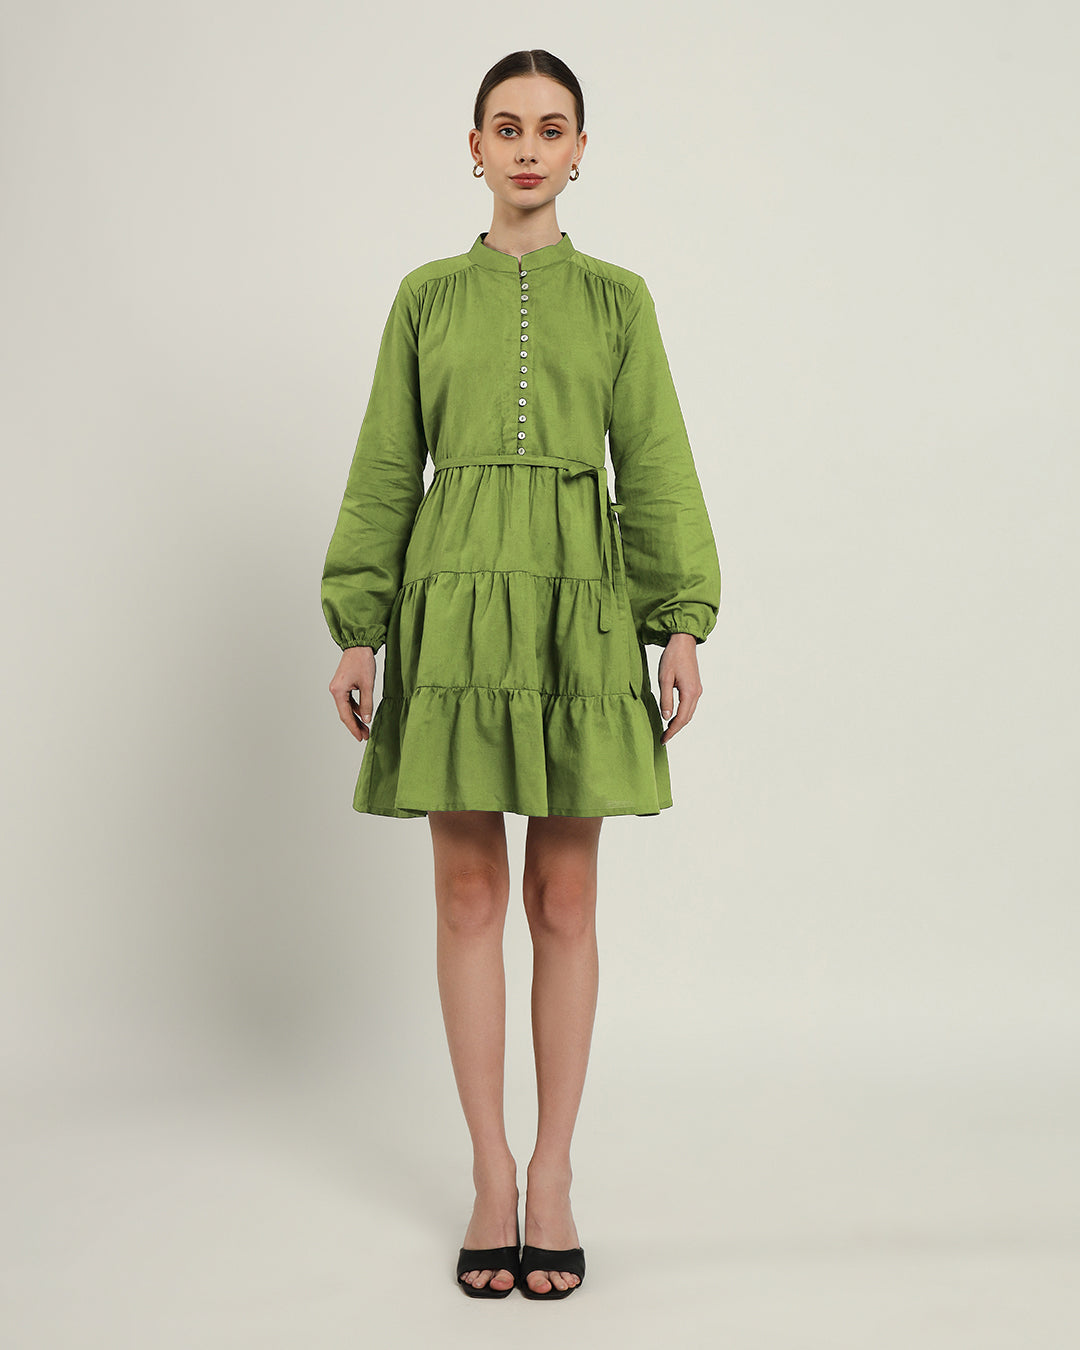 The Ely Fern Cotton Dress